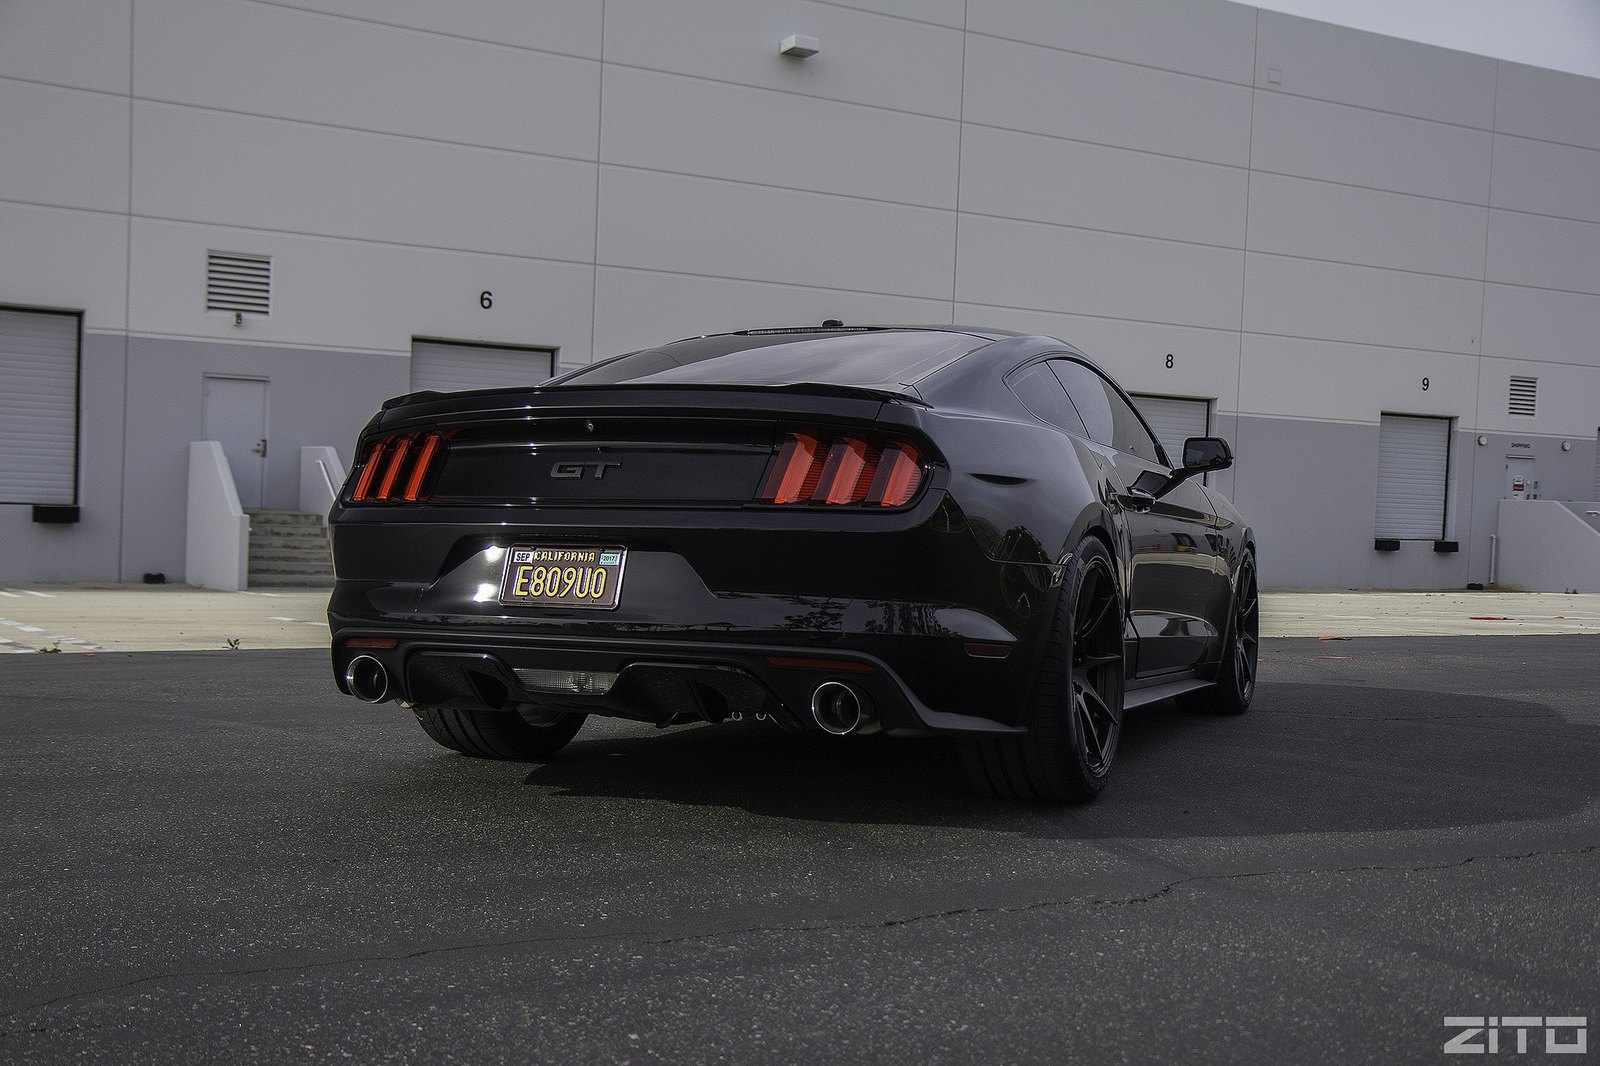 shadow-black-ford-mustang-gtpp-s550-zito-zf03-black-concave-flow-form-wheels.jpg